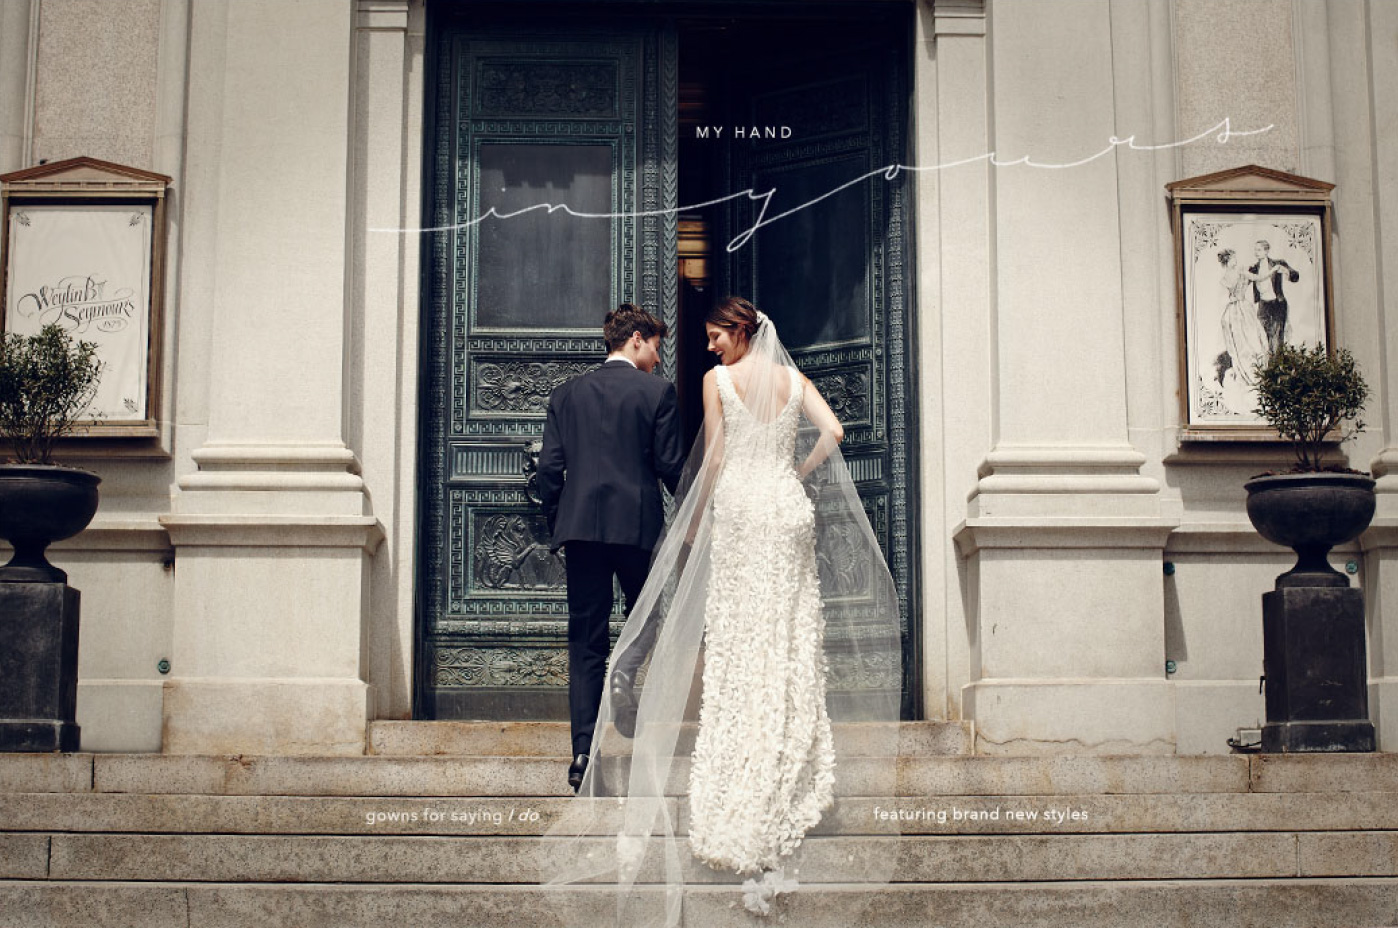 Shooting for BHLDN in New York City and Brooklyn